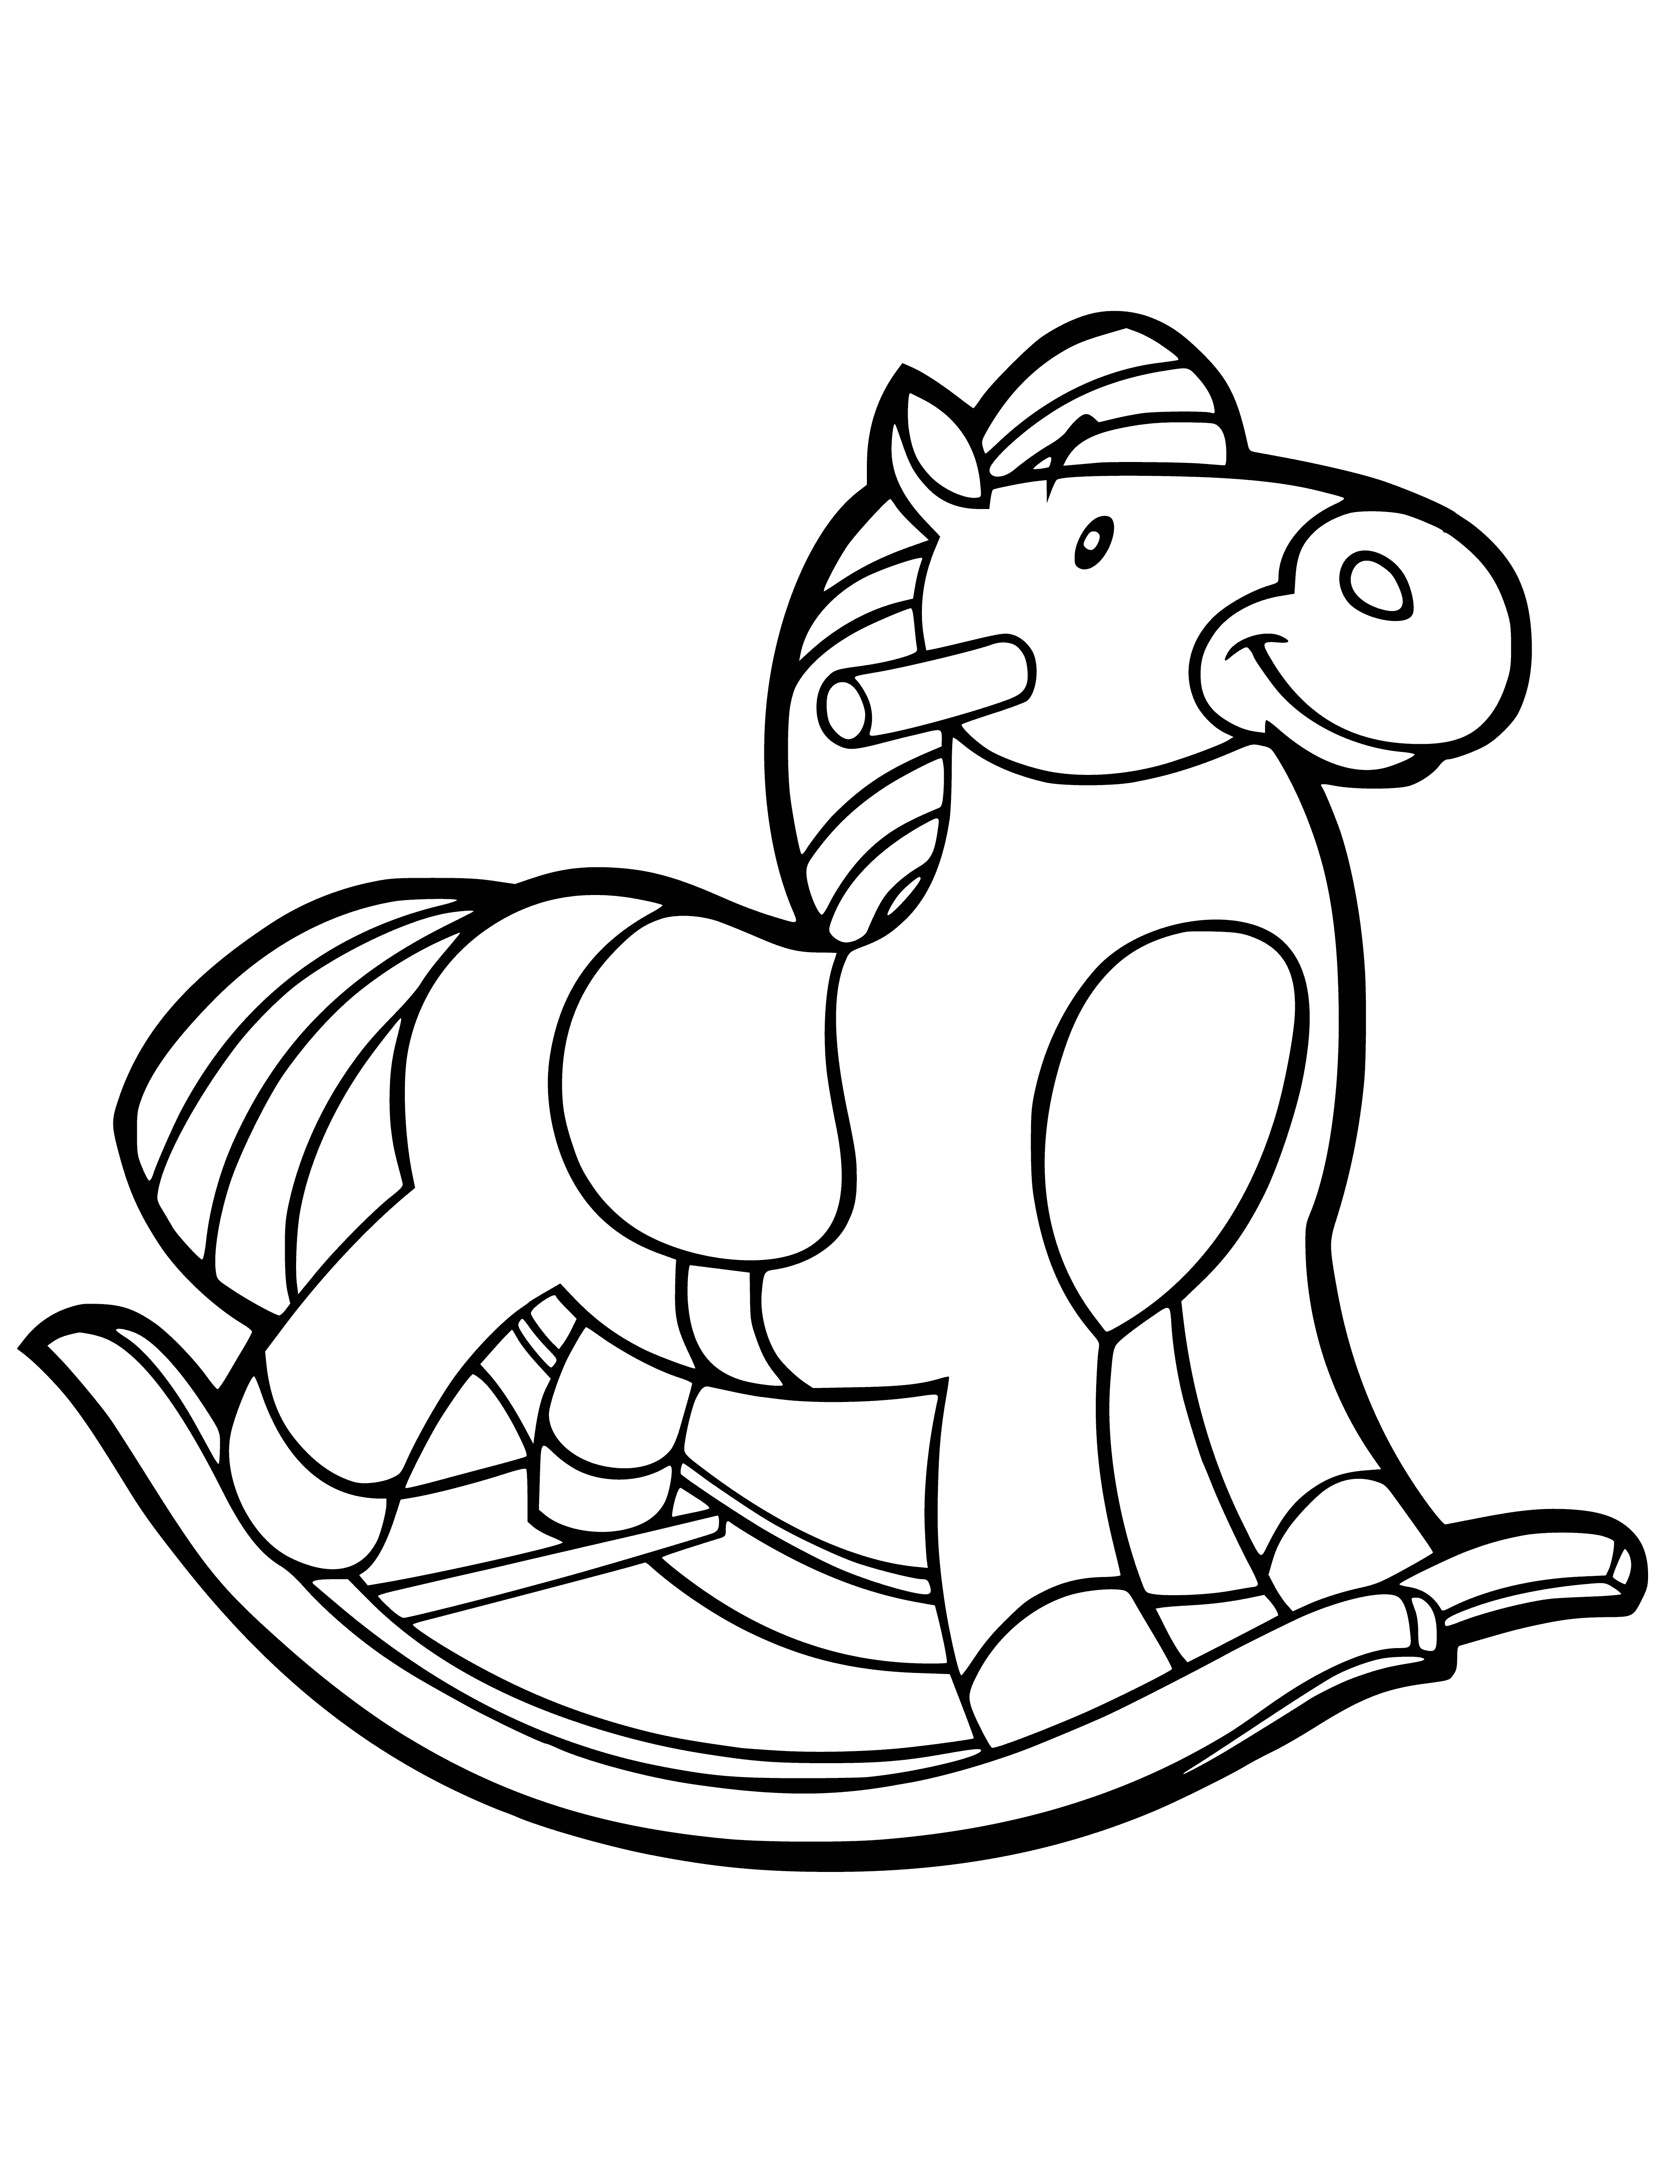 Rocking horse coloring page